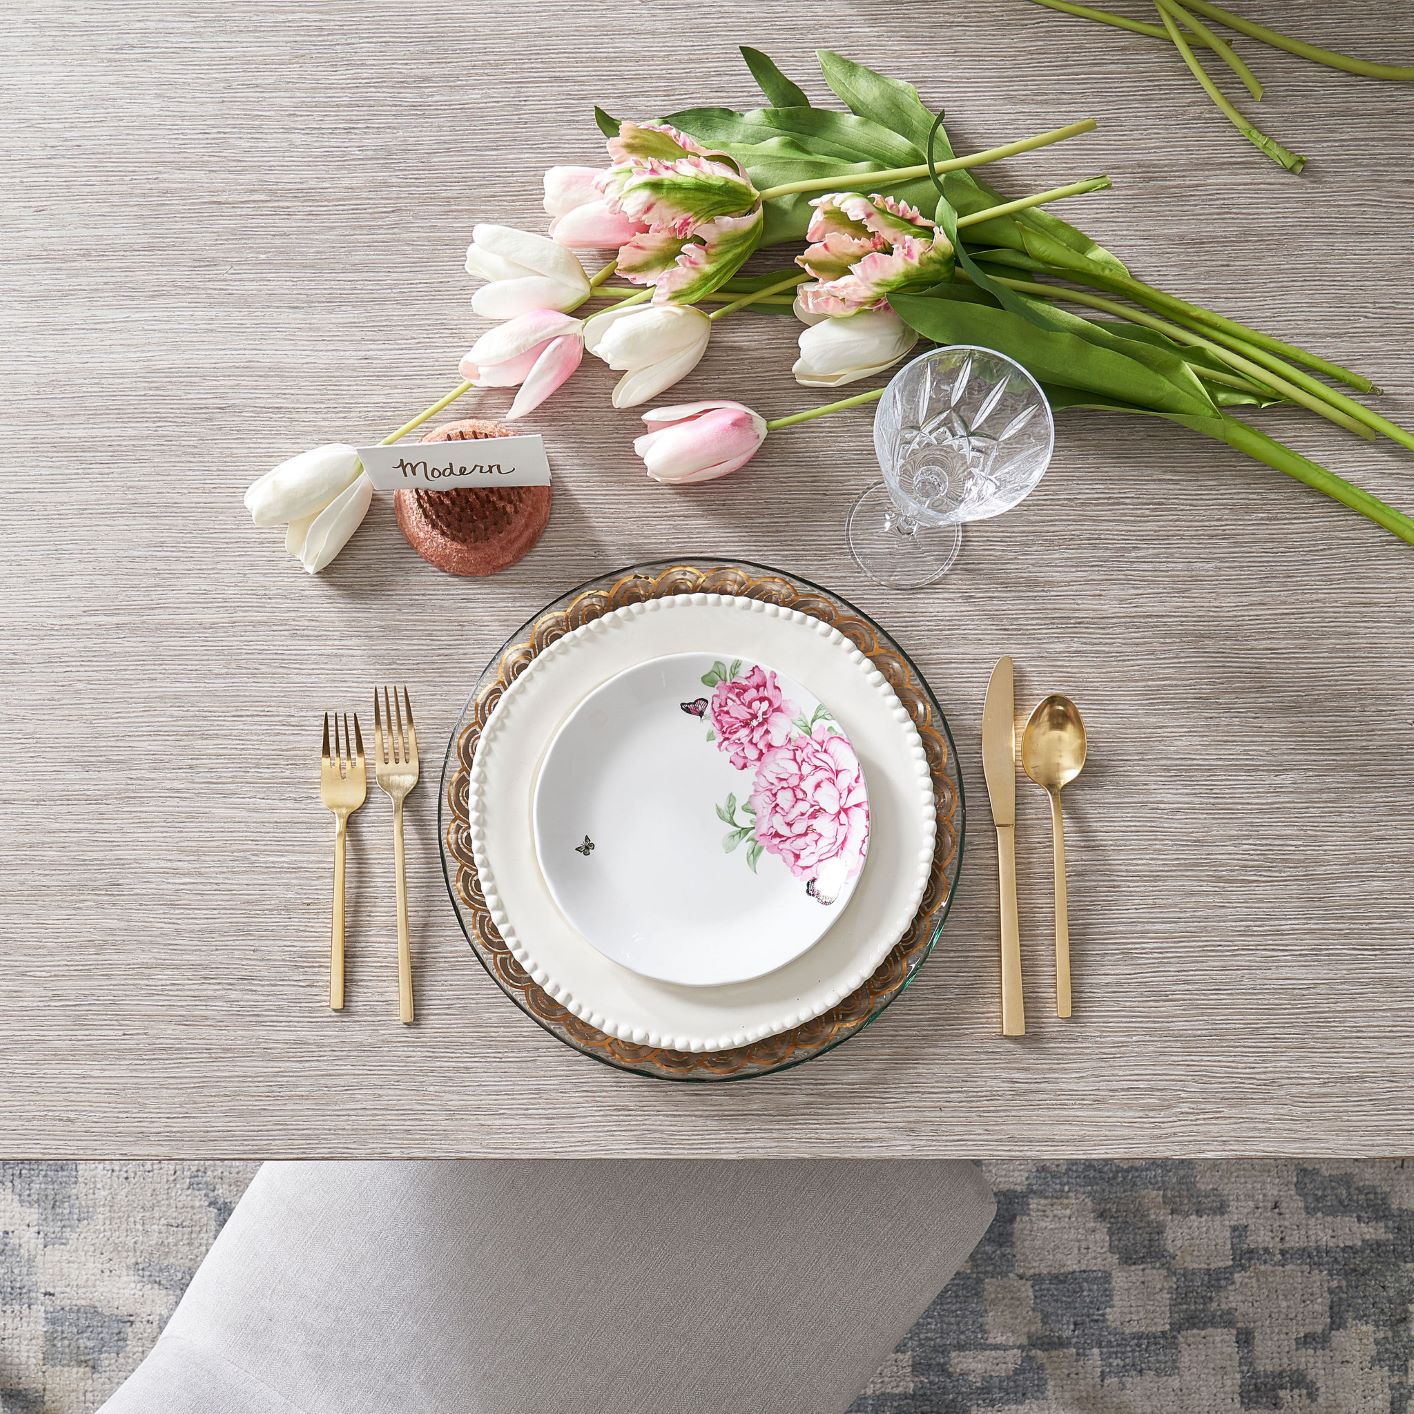 Create a Modern Farmhouse Place Setting in 5 Minutes